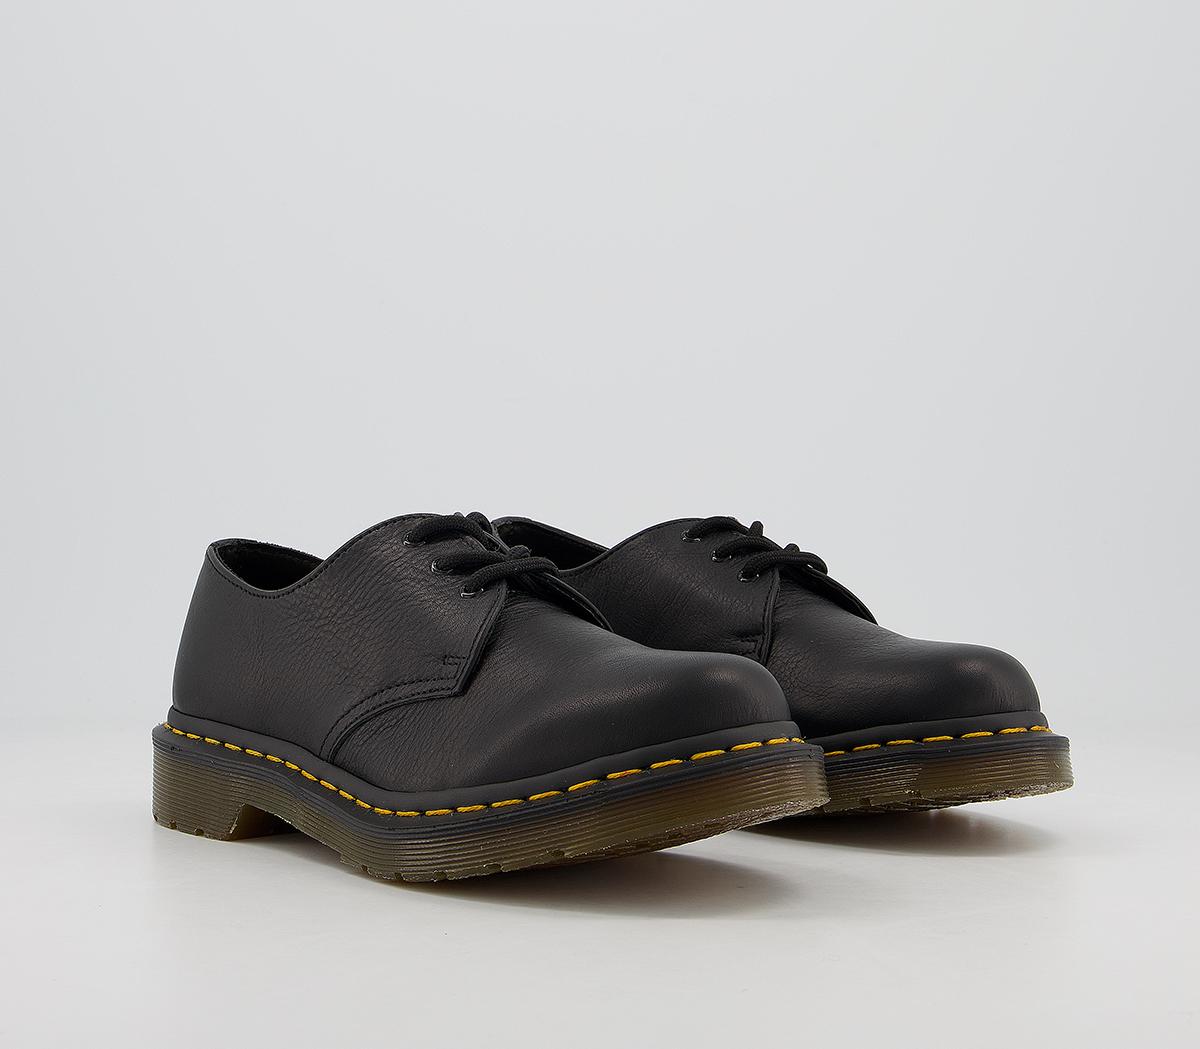 Dr. Martens 3 Eyelet Lace Up Shoes Black Virginia - Flat Shoes for Women